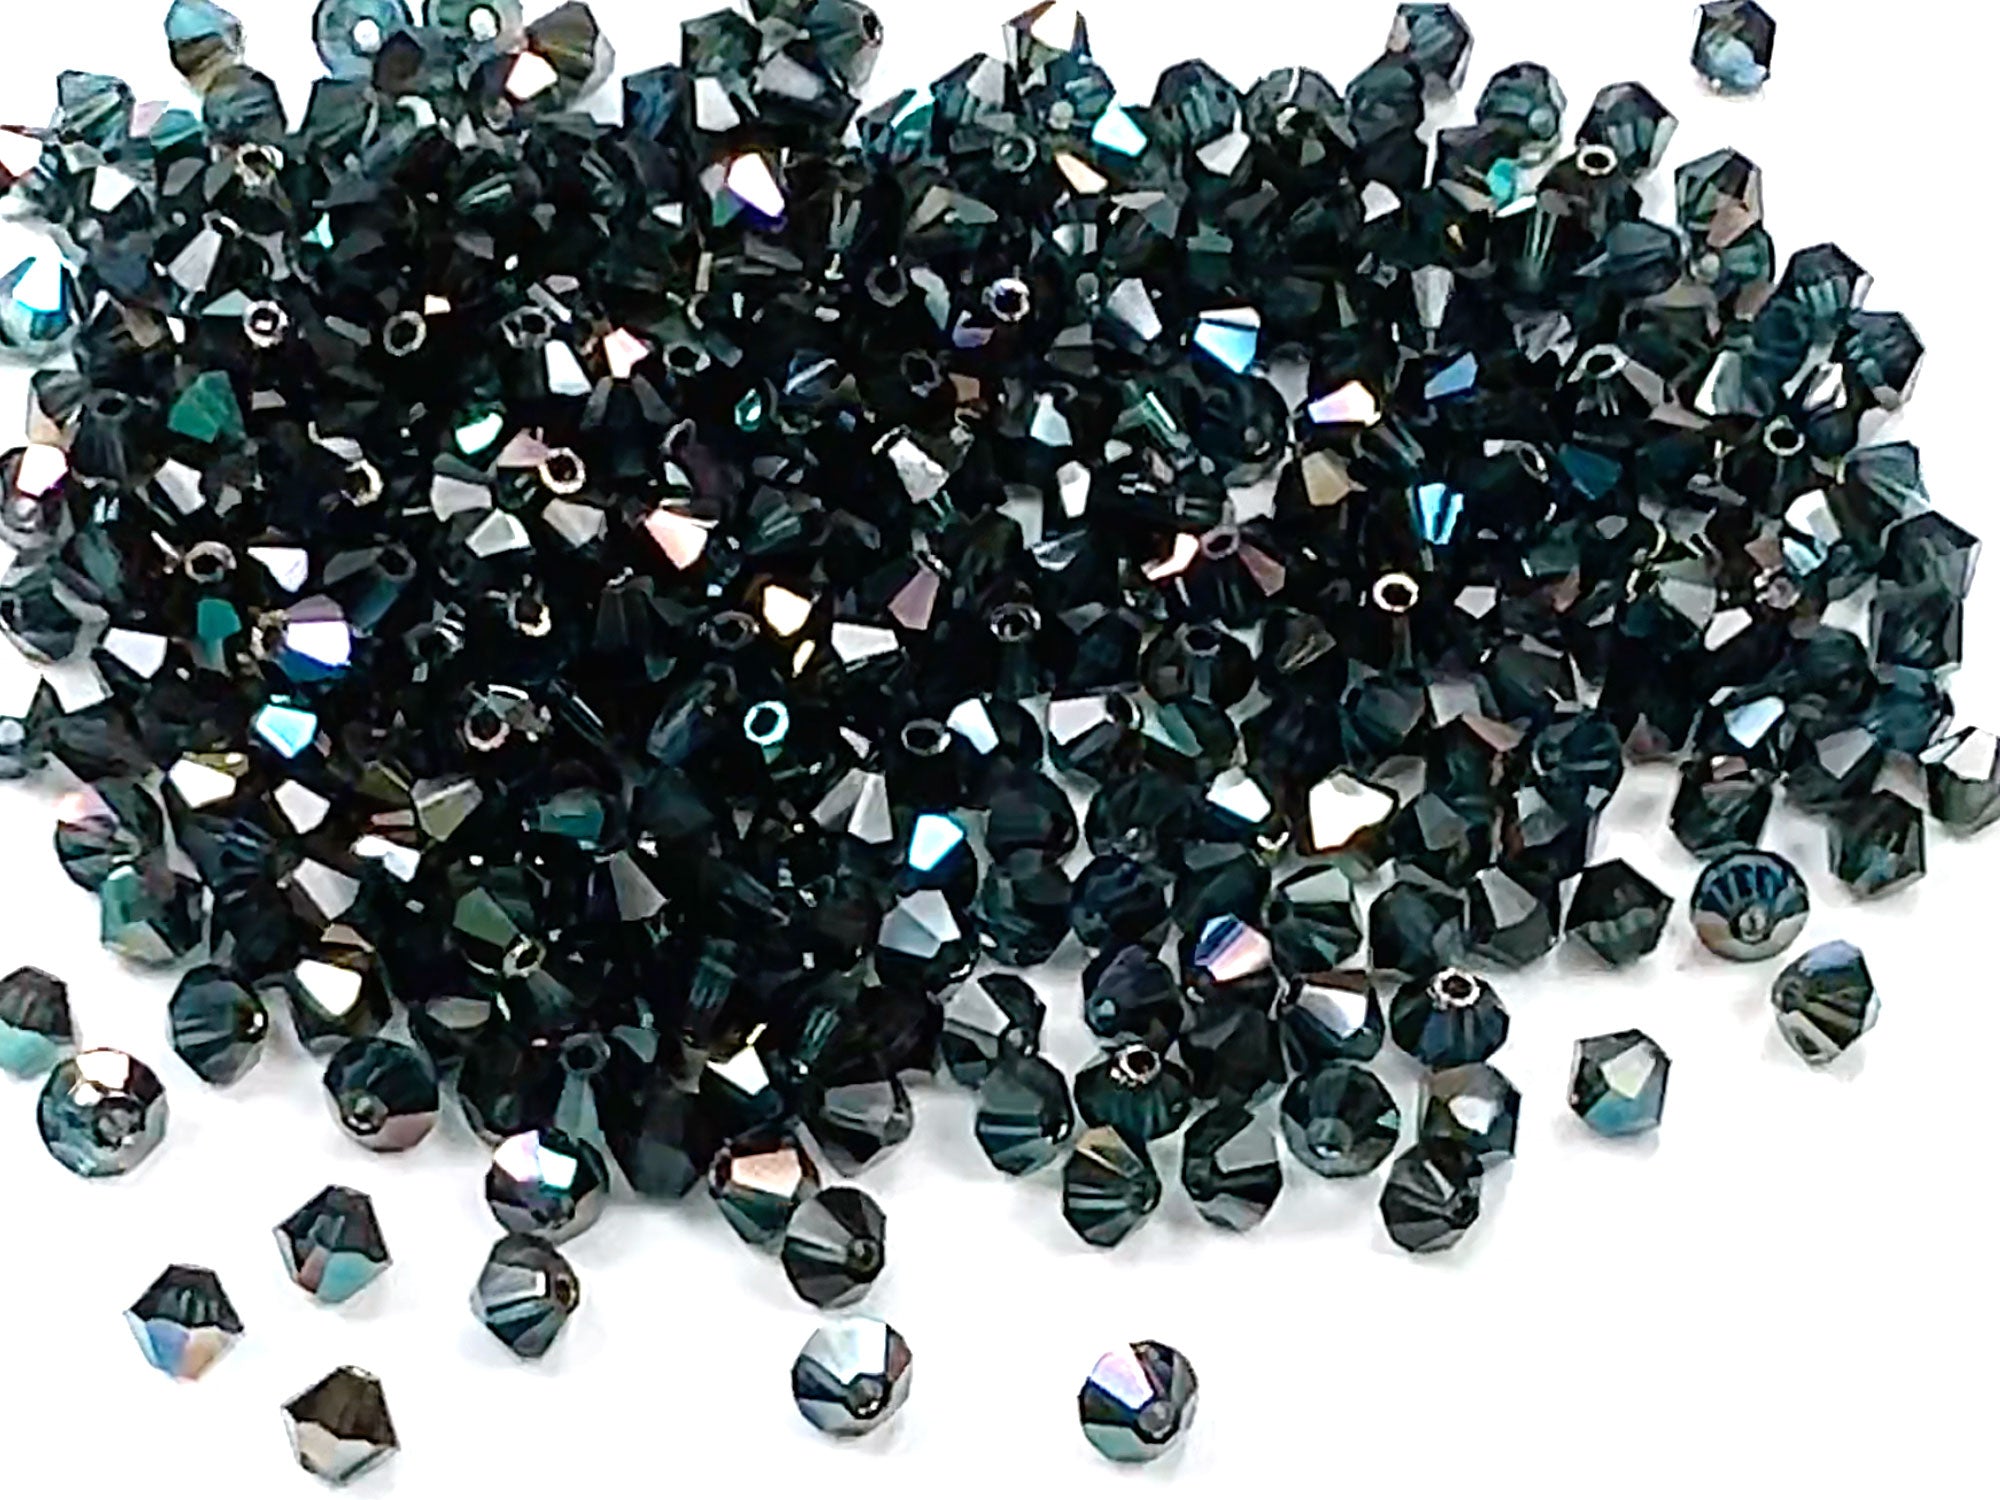 Montana Celsian coated, Czech Glass Beads, Machine Cut Bicones (MC Rondell, Diamond Shape), Preciosa silvery blue crystals coated with Celsianite, 4mm